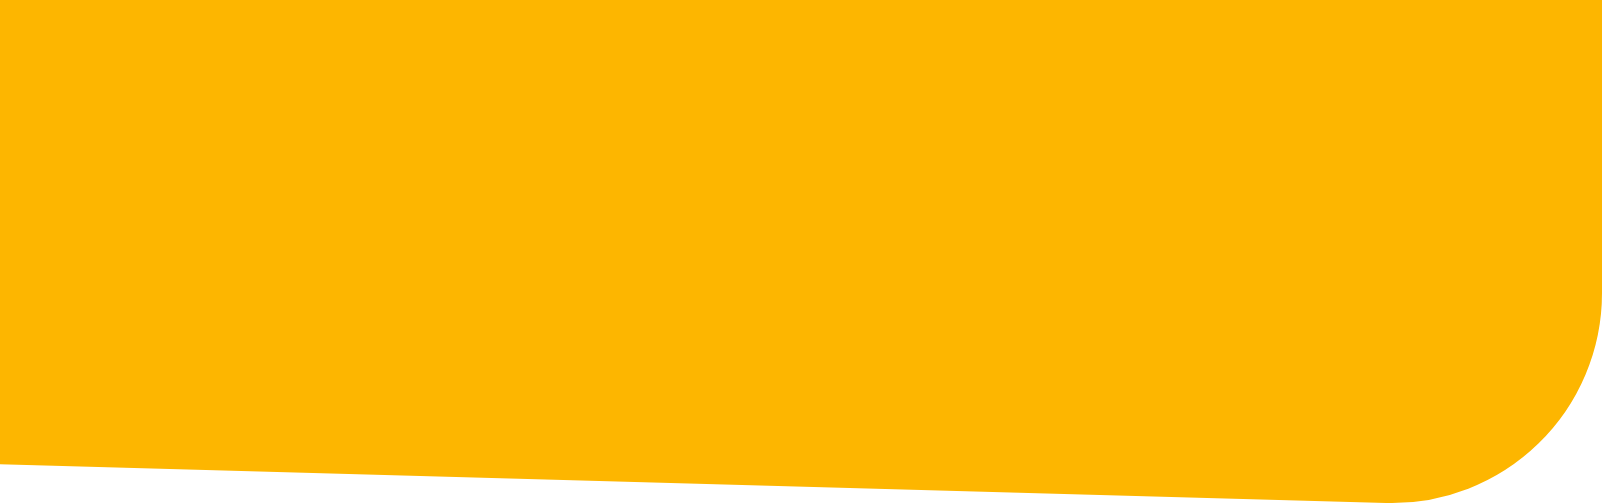 a yellow rectangle